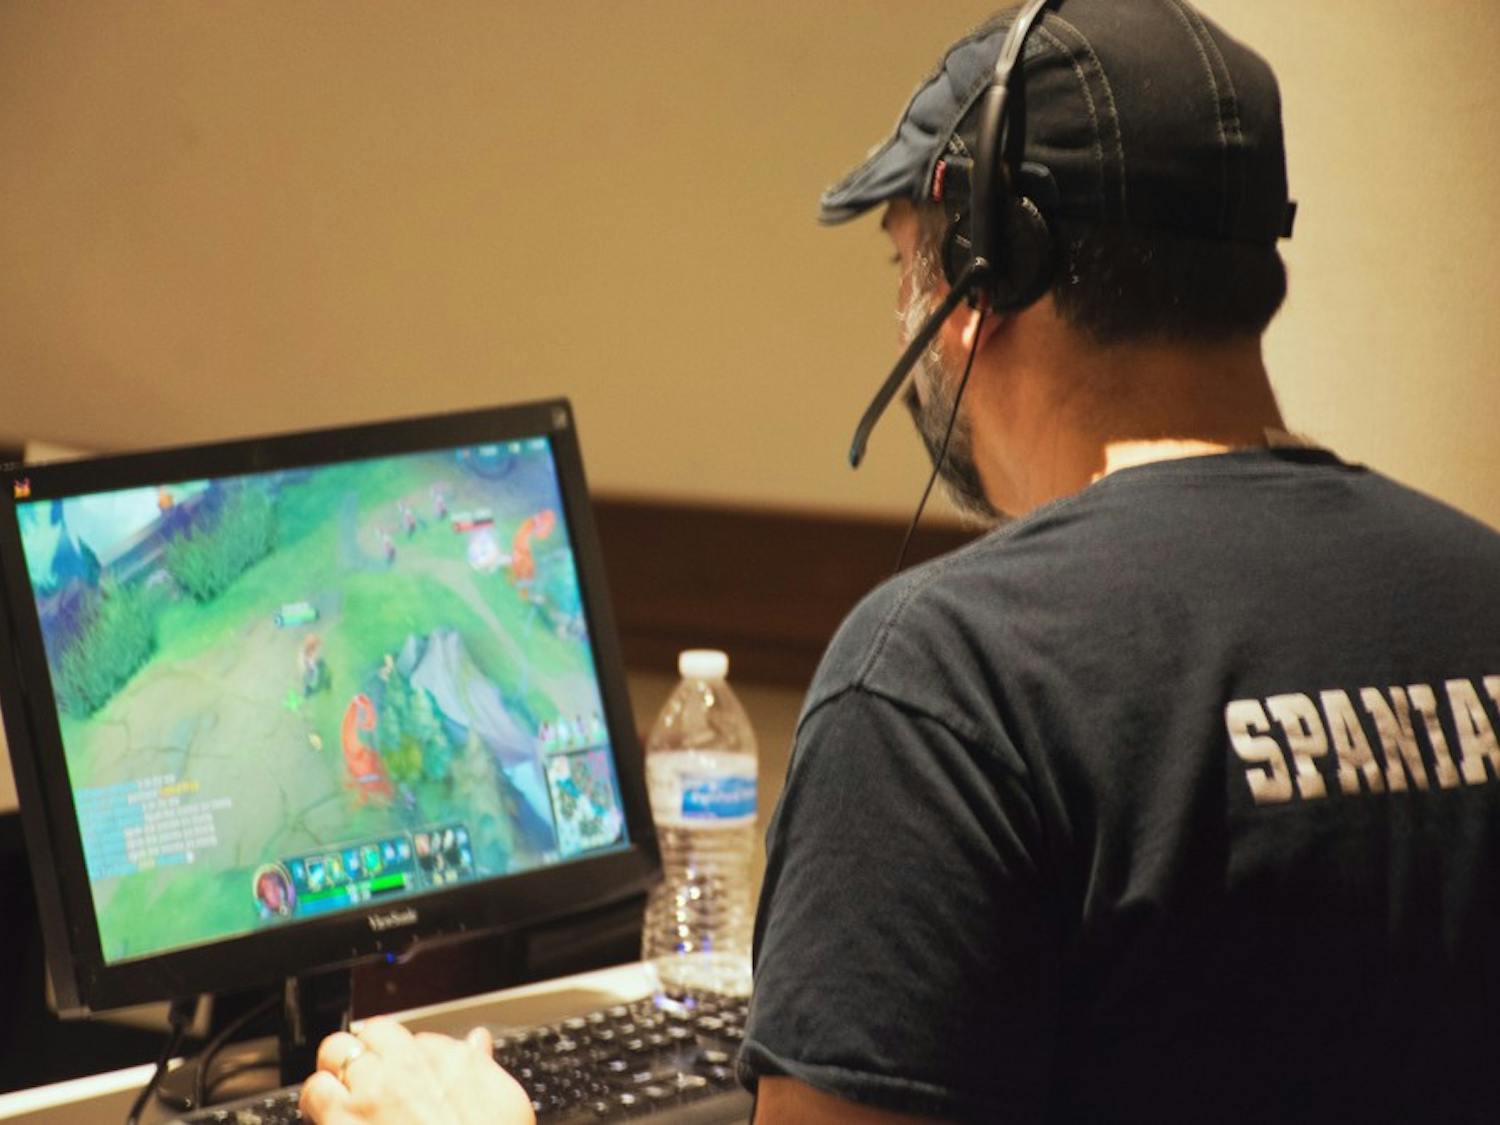 UNC Esports held their biannual gamefest on Saturday in Sitterson Hall.